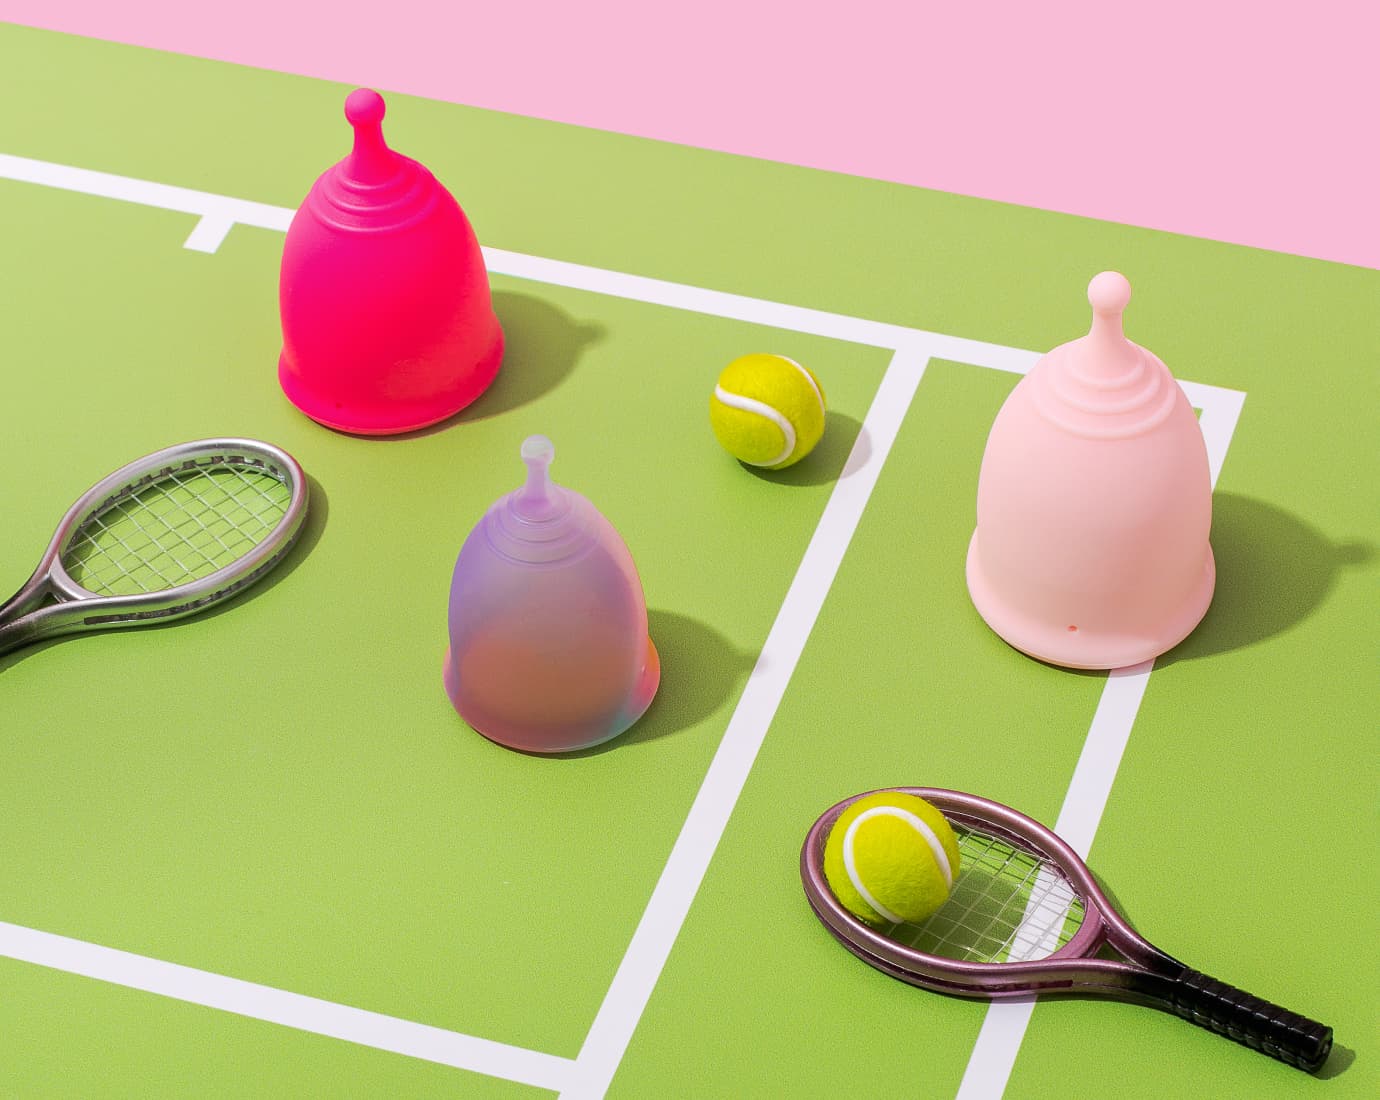 Menstrual cups on a tennis court